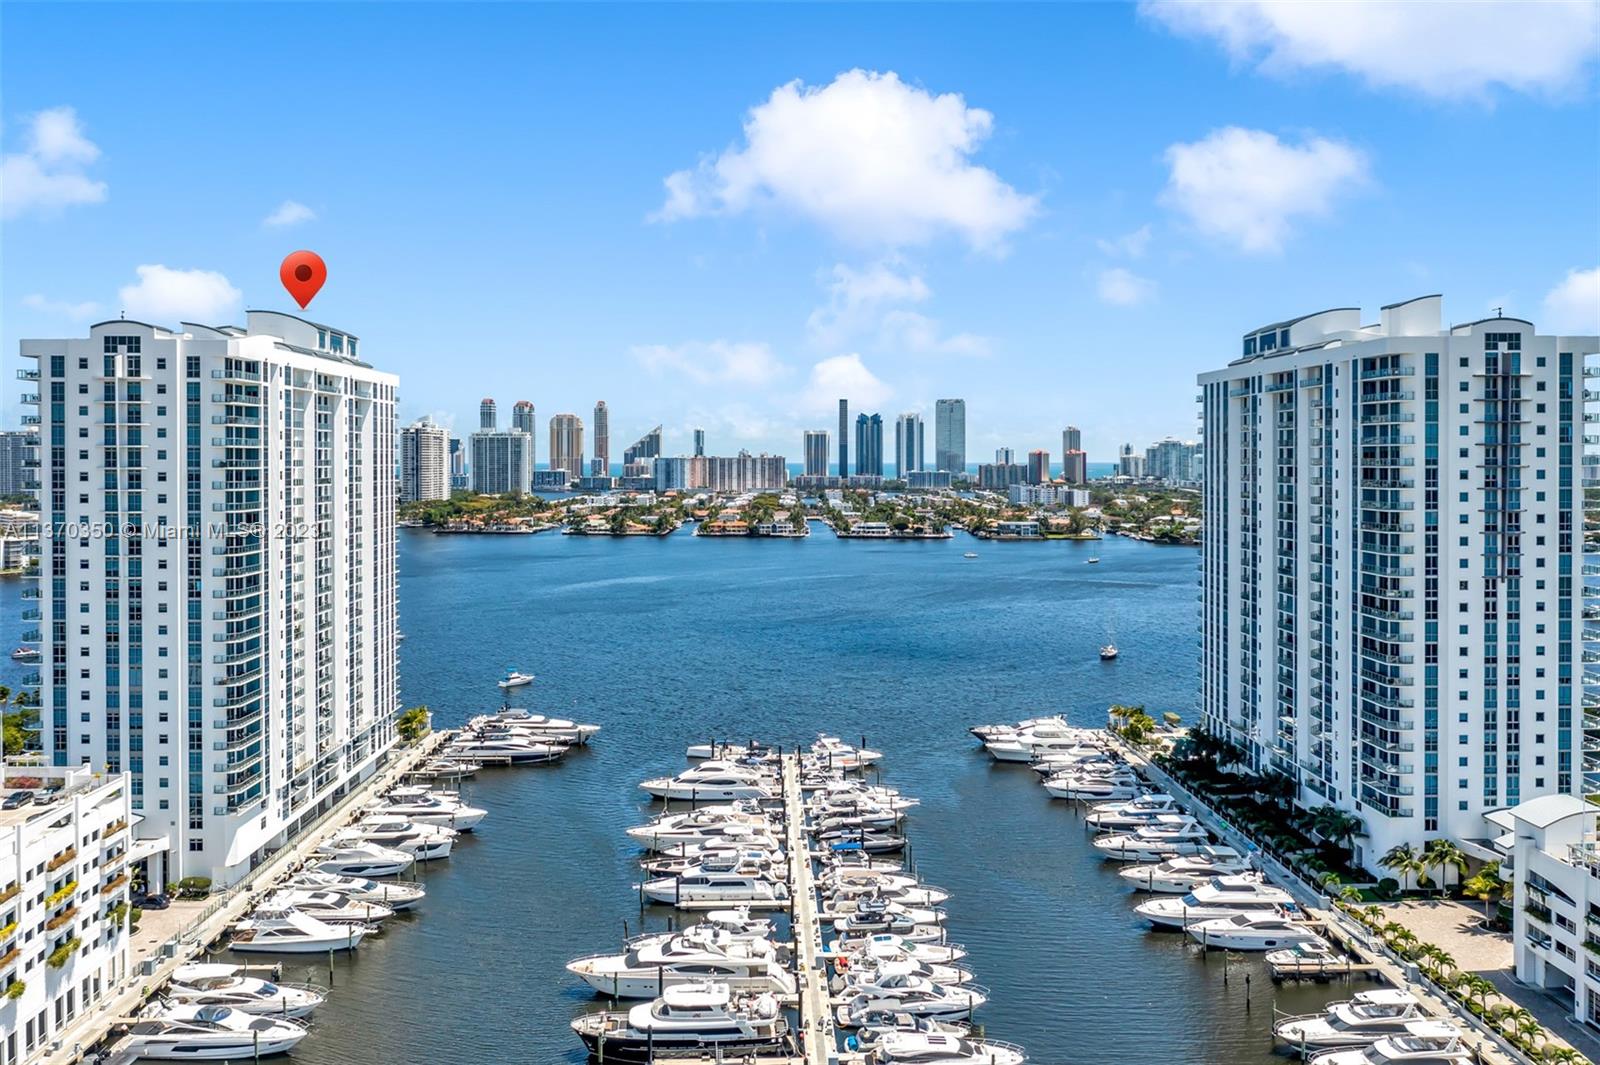 Don't miss out on this incredible opportunity to own a stunning 2 bedroom, 2.5 bathroom unit with breathtaking marina views! This luxurious building boasts all of the high-end amenities you could dream of.

But that's not all - you also have the option to purchase a 50ft deed dock that can accommodate boats up to 60ft in length! Imagine being able to walk out of your unit and step right onto your own private vessel. This is truly a once-in-a-lifetime opportunity.

The dock can be purchased separately for $375,000 or together with the unit for a total price of $1,540,000. Don't wait - contact us today to make your dream of waterfront living a reality!